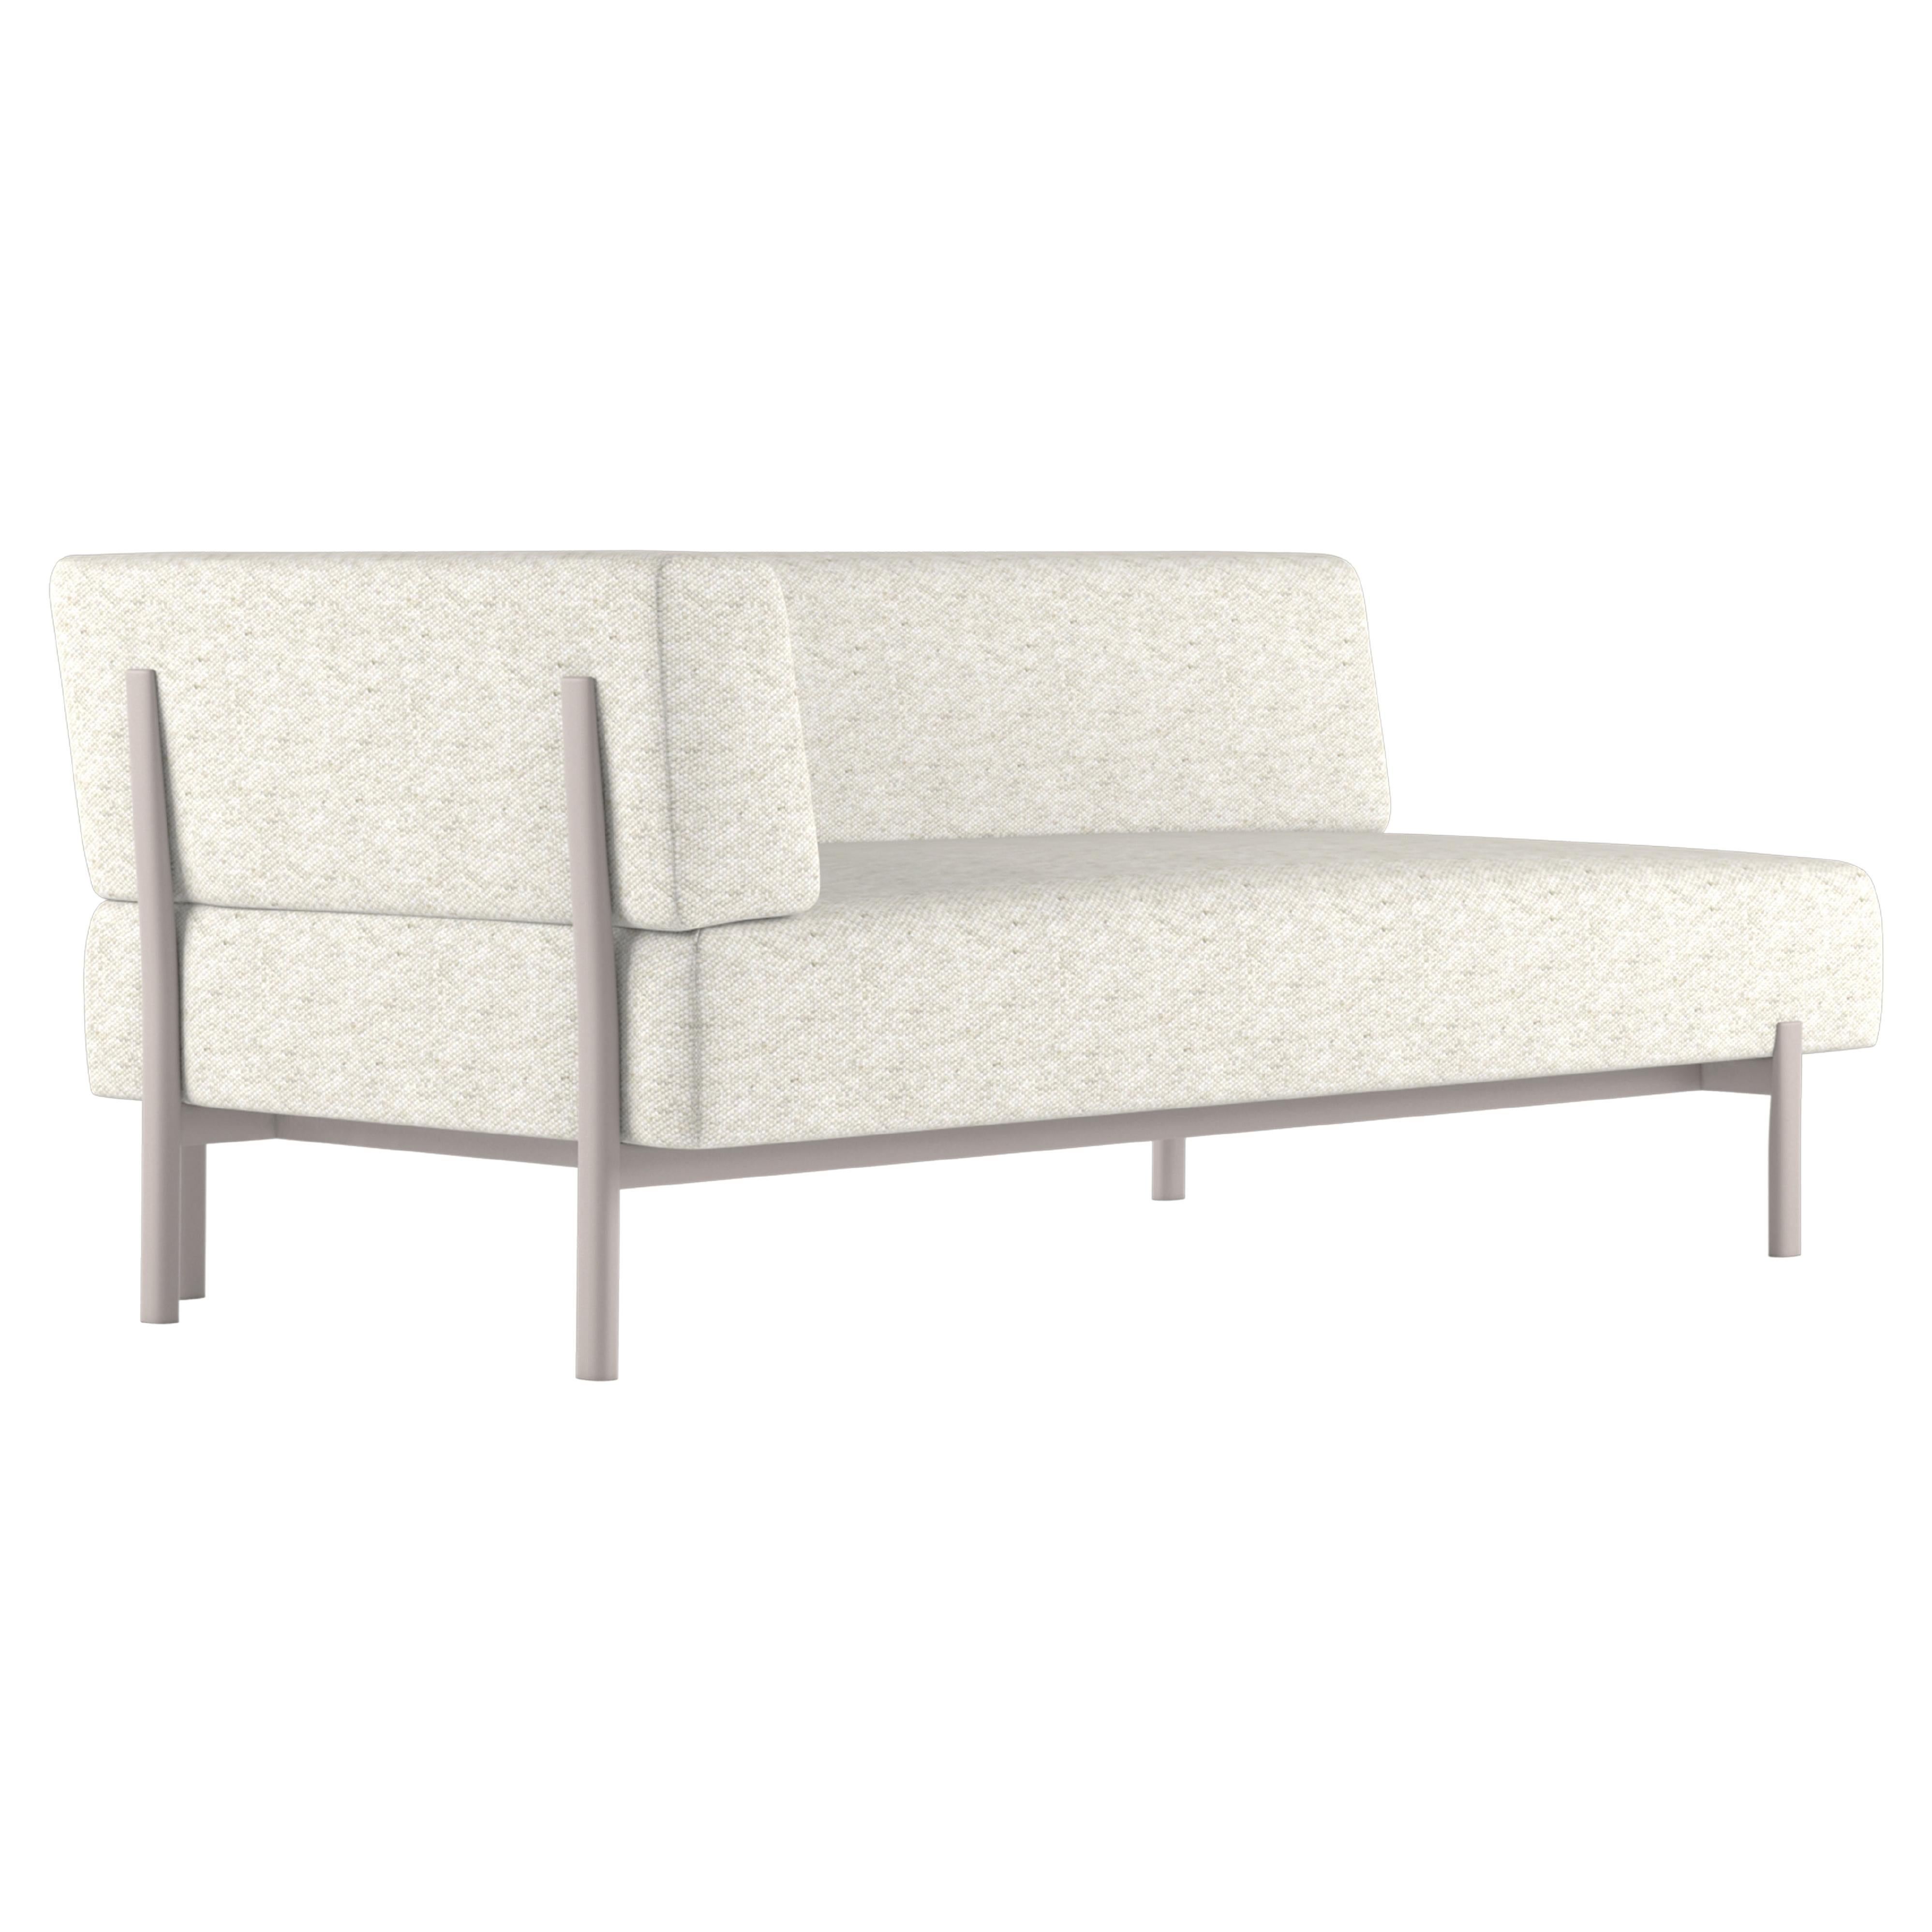 Alias T05_O DX Ten Angular Outdoor Sofa in White & Sand Lacquered Aluminum Frame For Sale